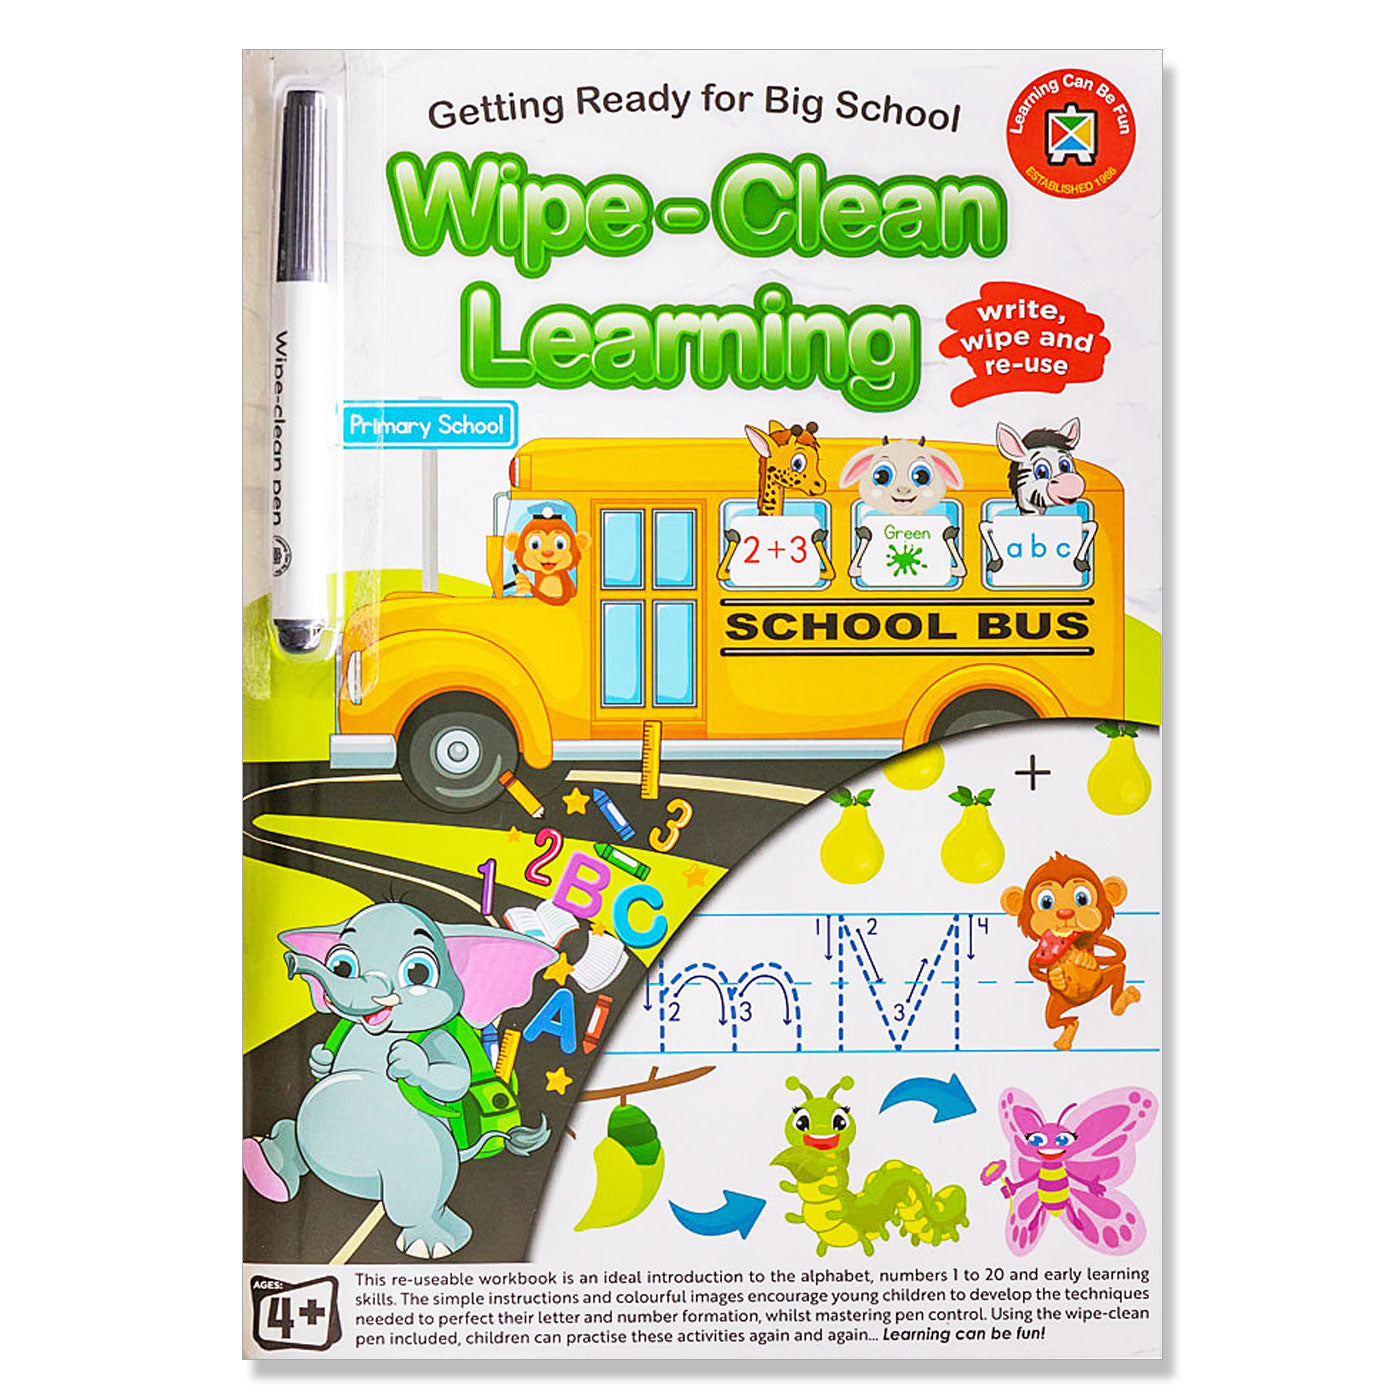 LCBF Wipe-Clean Reusable Learning Workbook Getting Ready for Big School with Marker Ages 4+